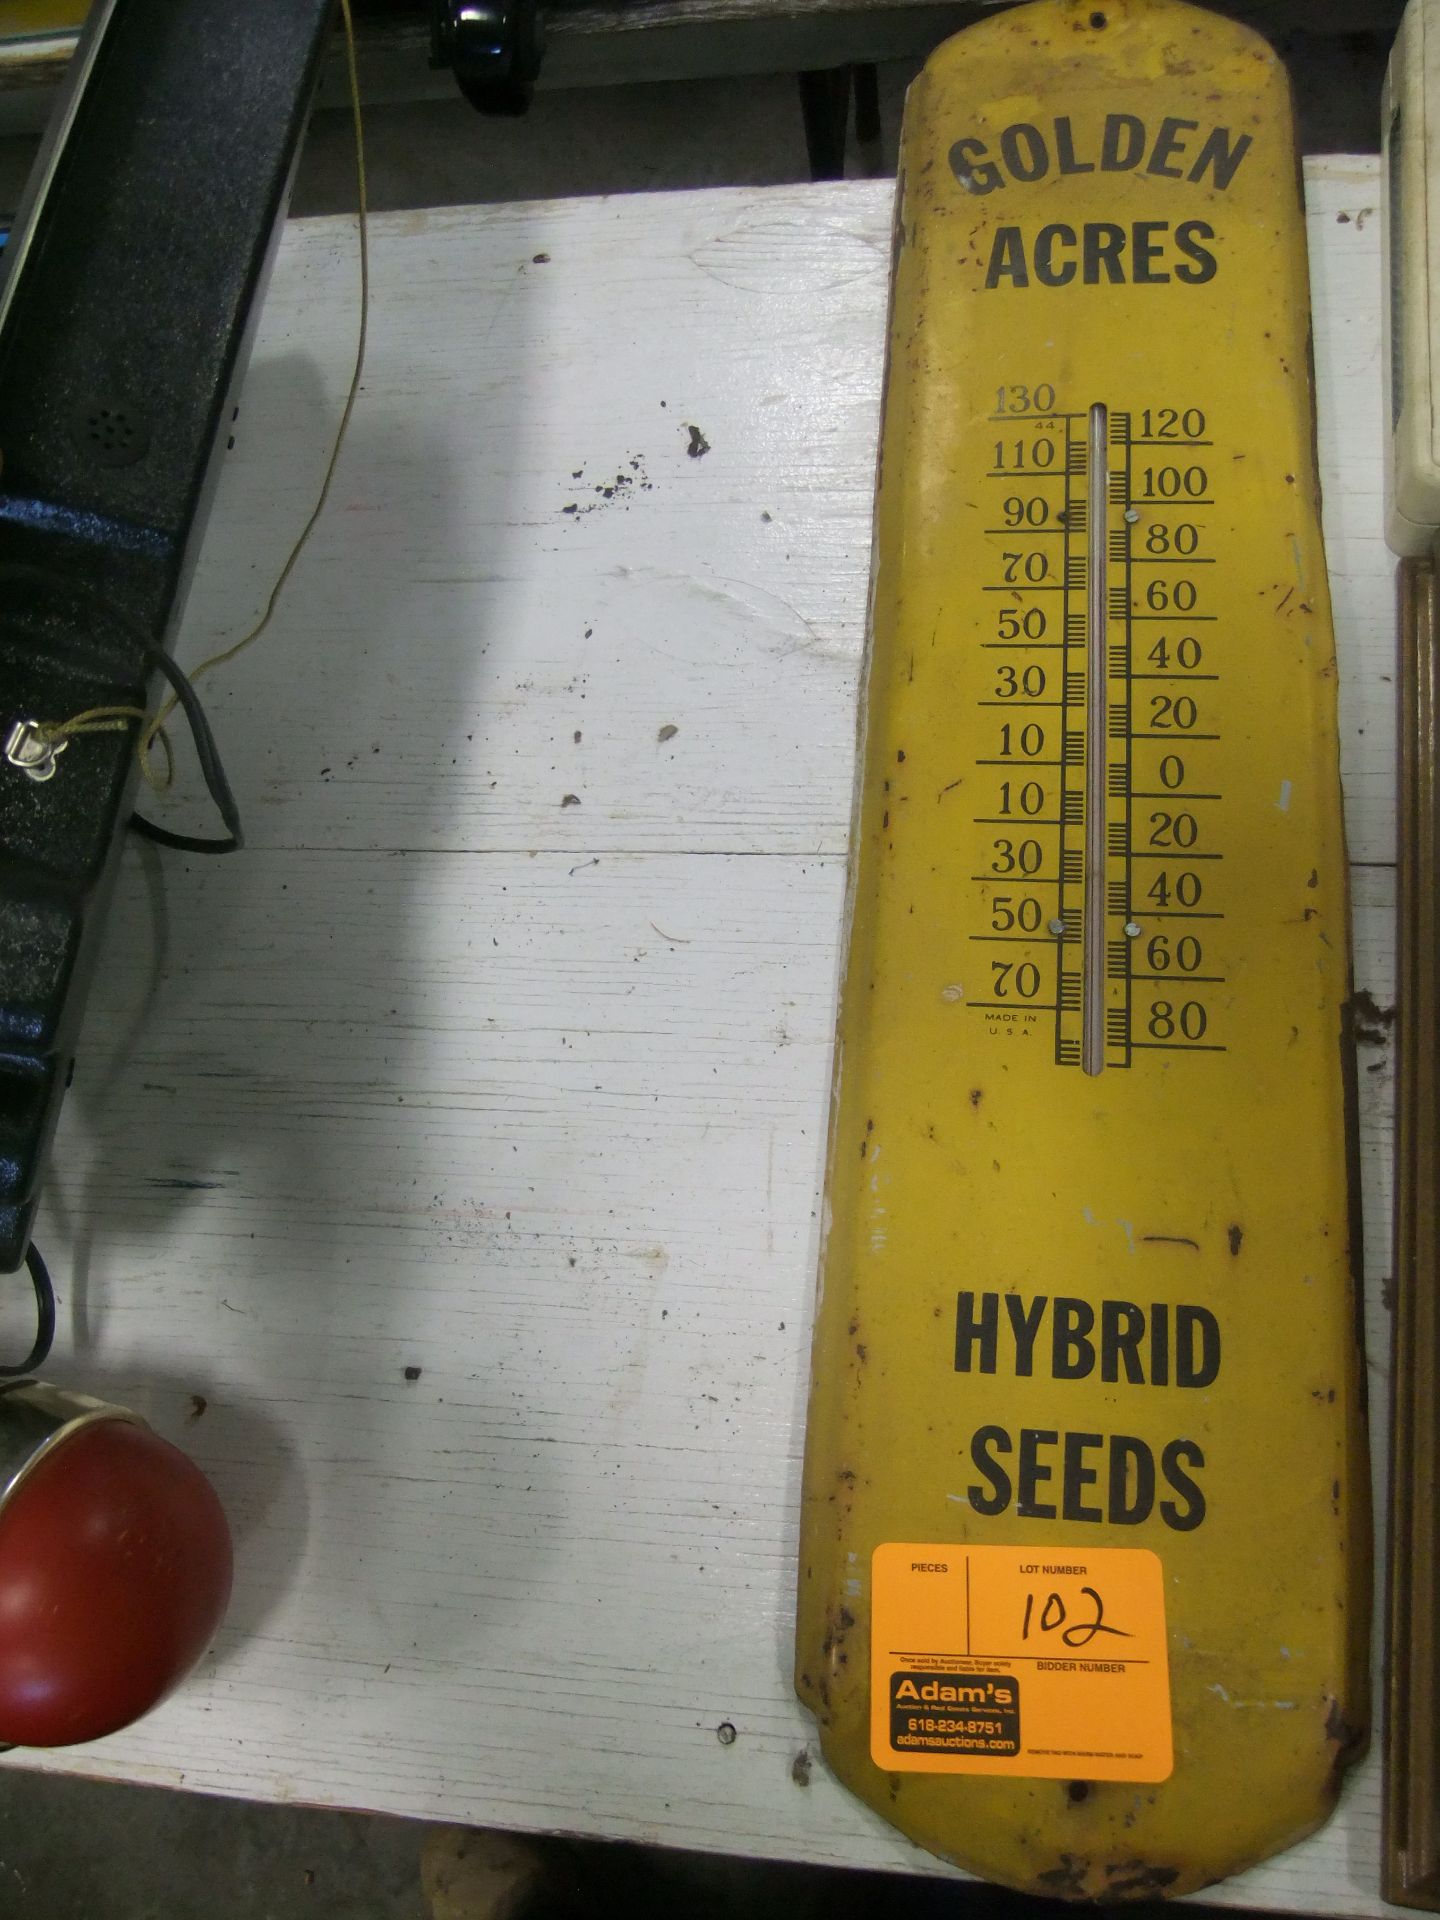 GOLDEN ACRES THERMOMETER